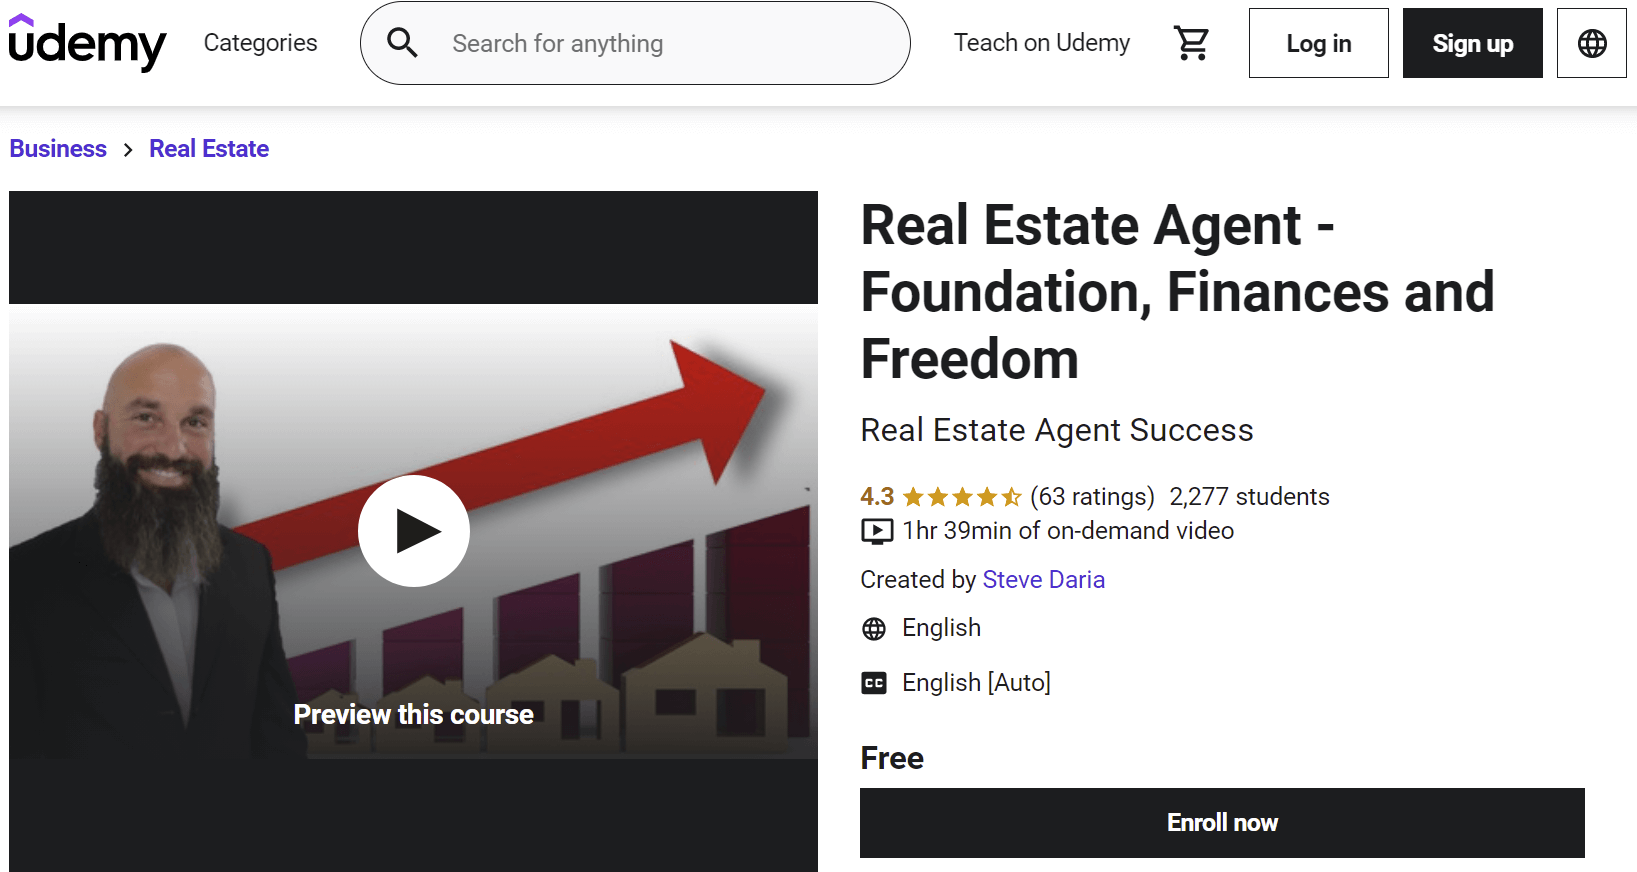 Udemy: Real Estate Agent - Foundation, Finances and Freedom Overview